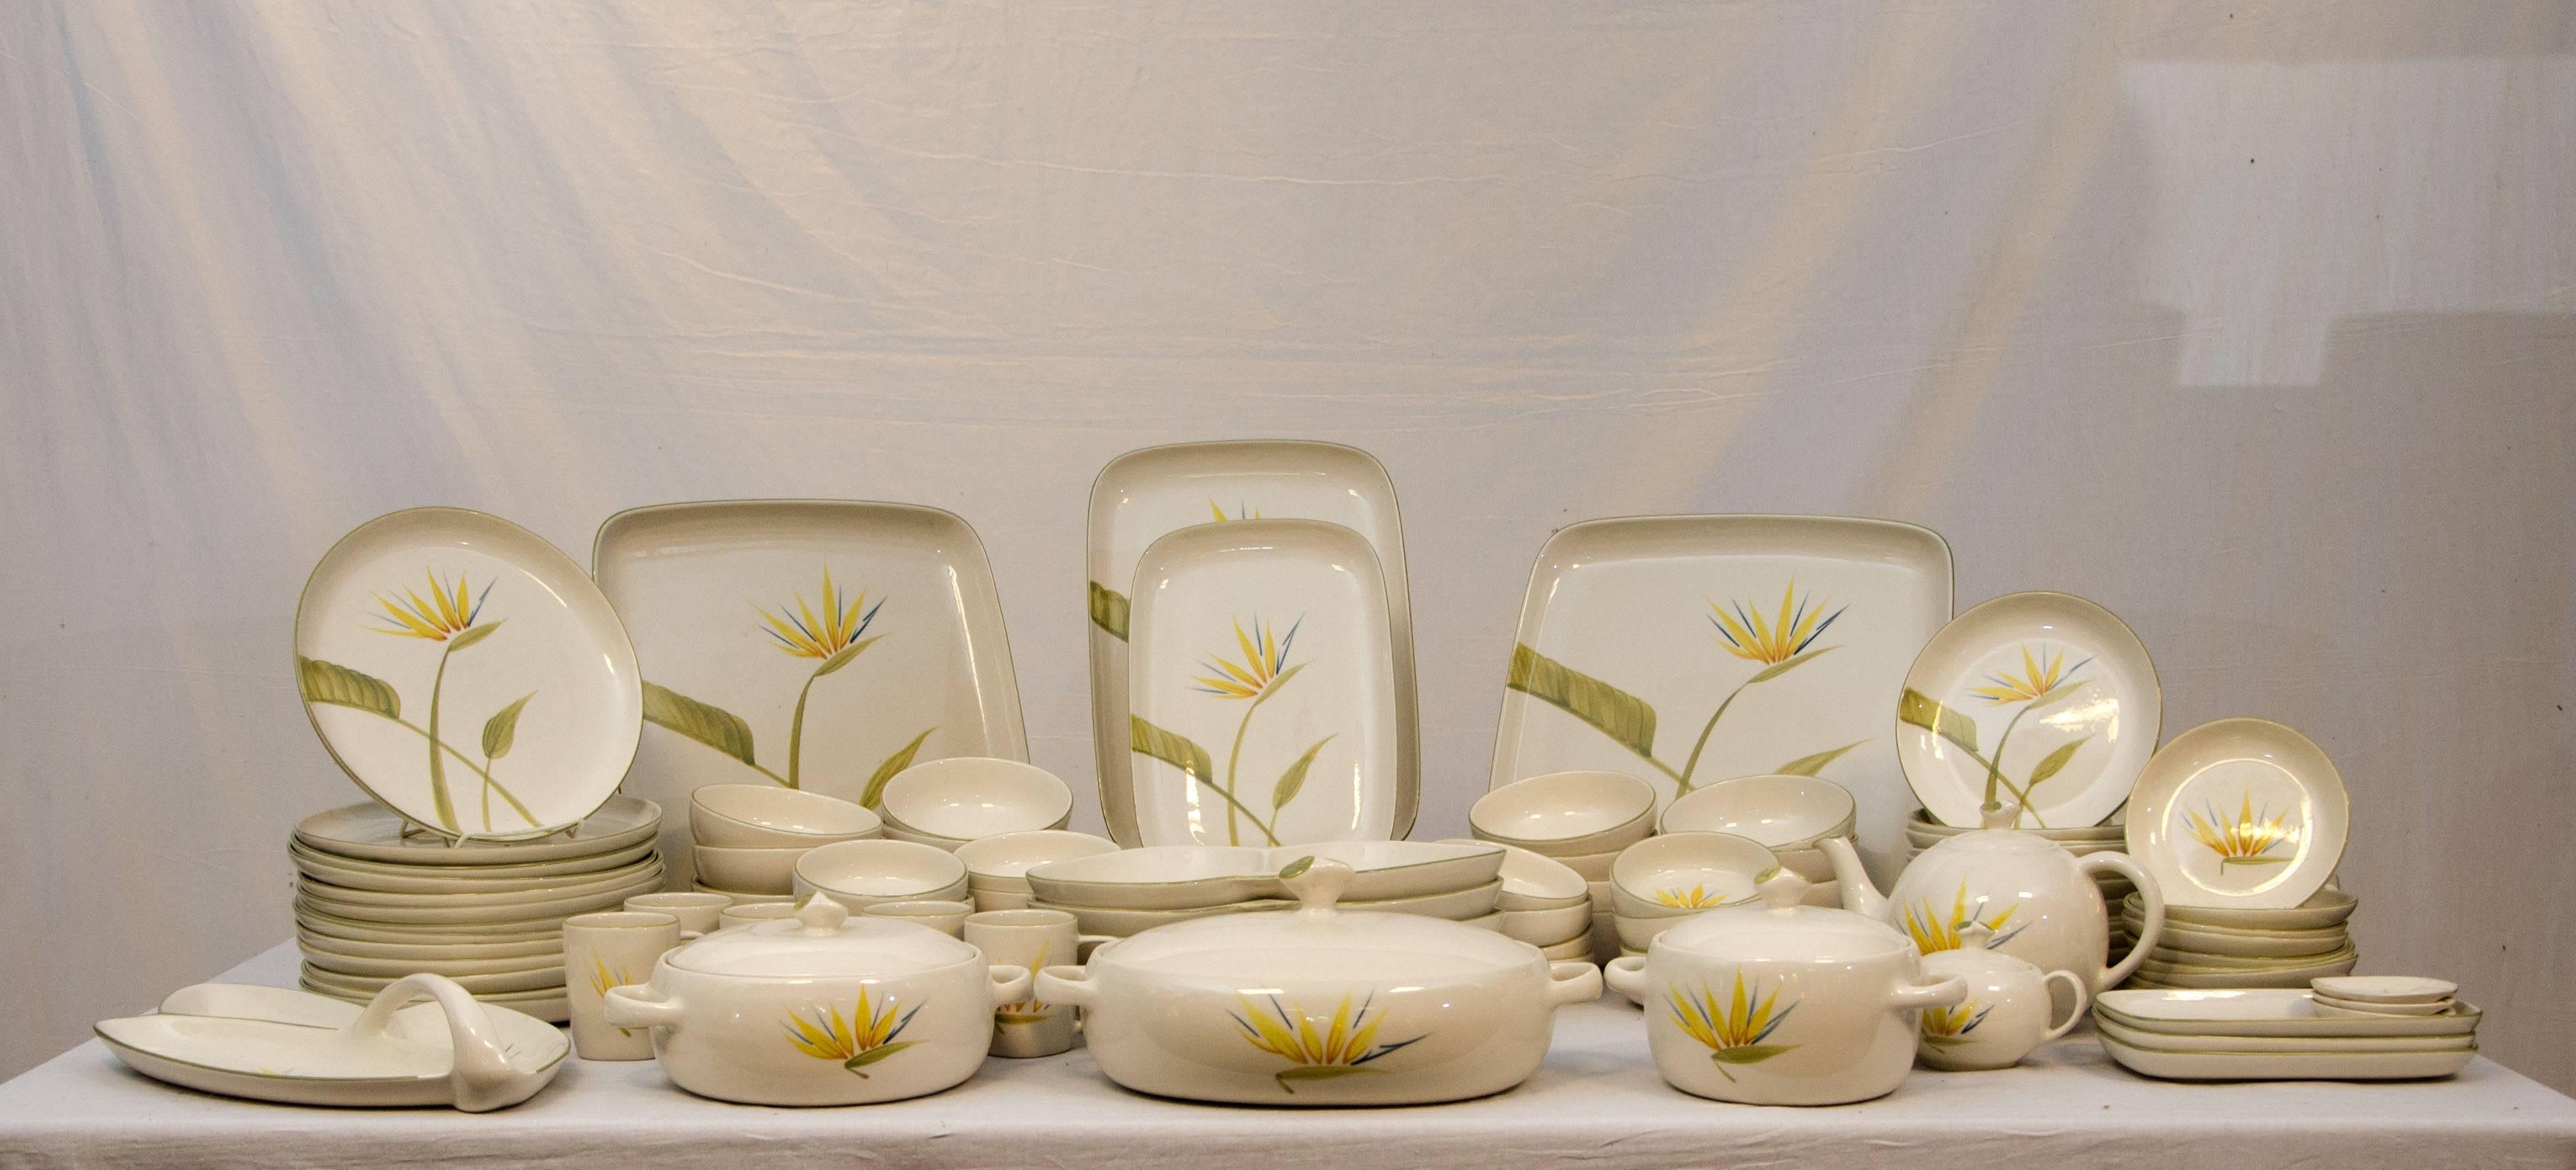 Huge set of California dinnerware by Winfield Pottery Co. Pattern name is 